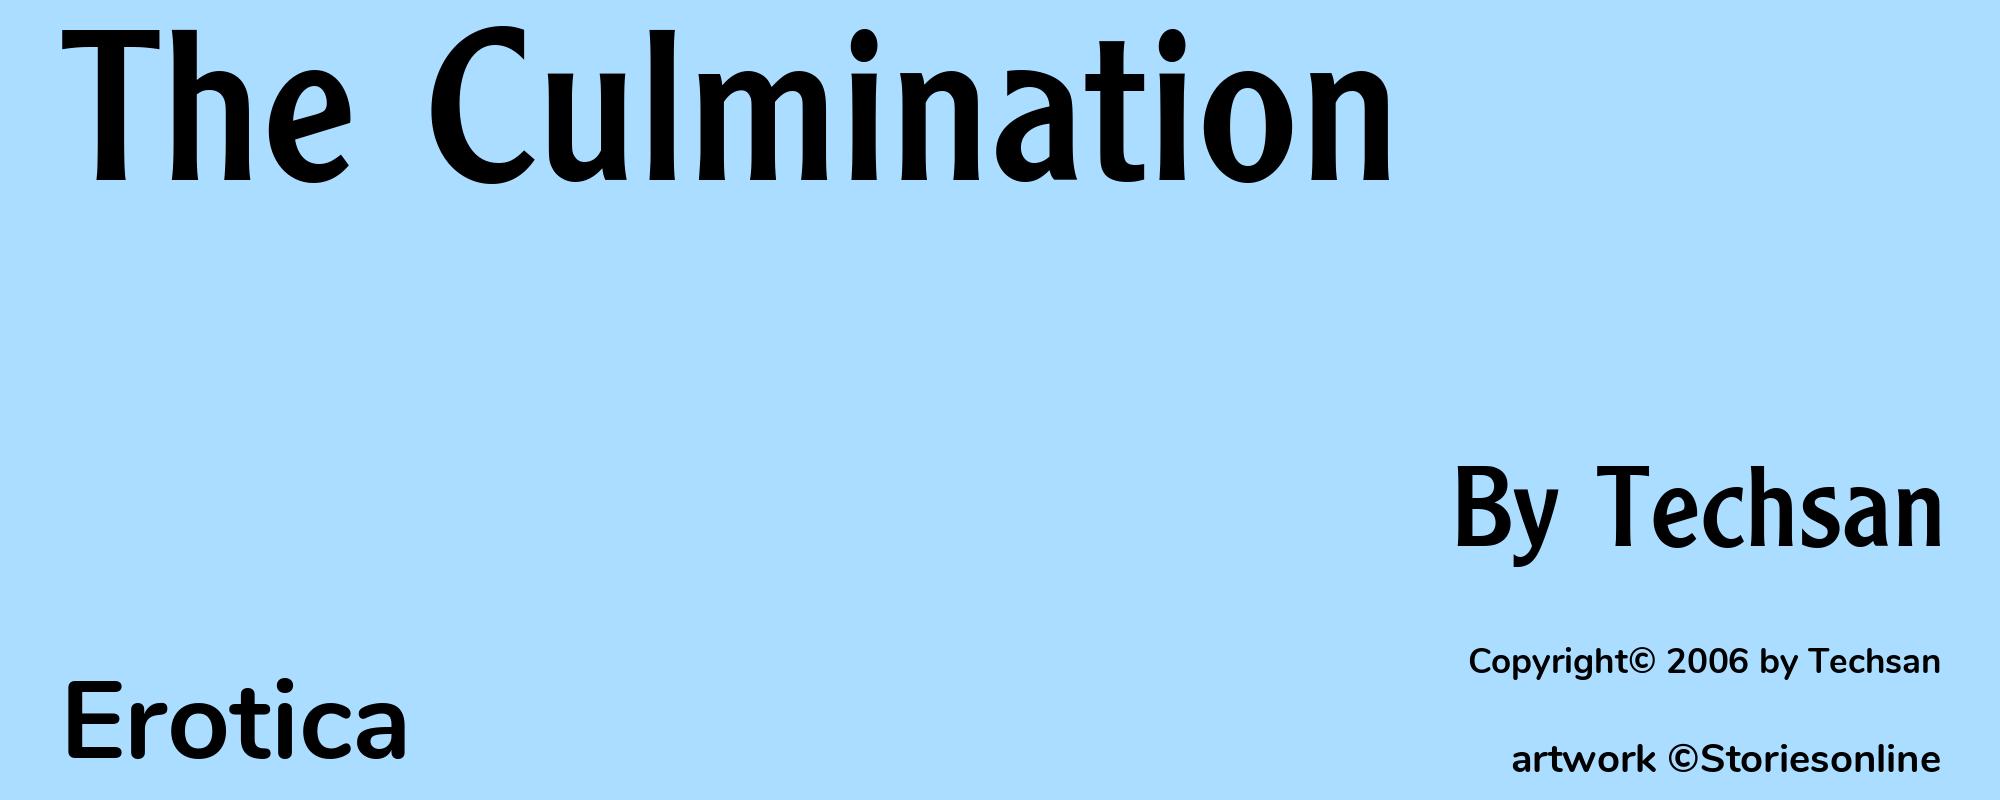 The Culmination - Cover